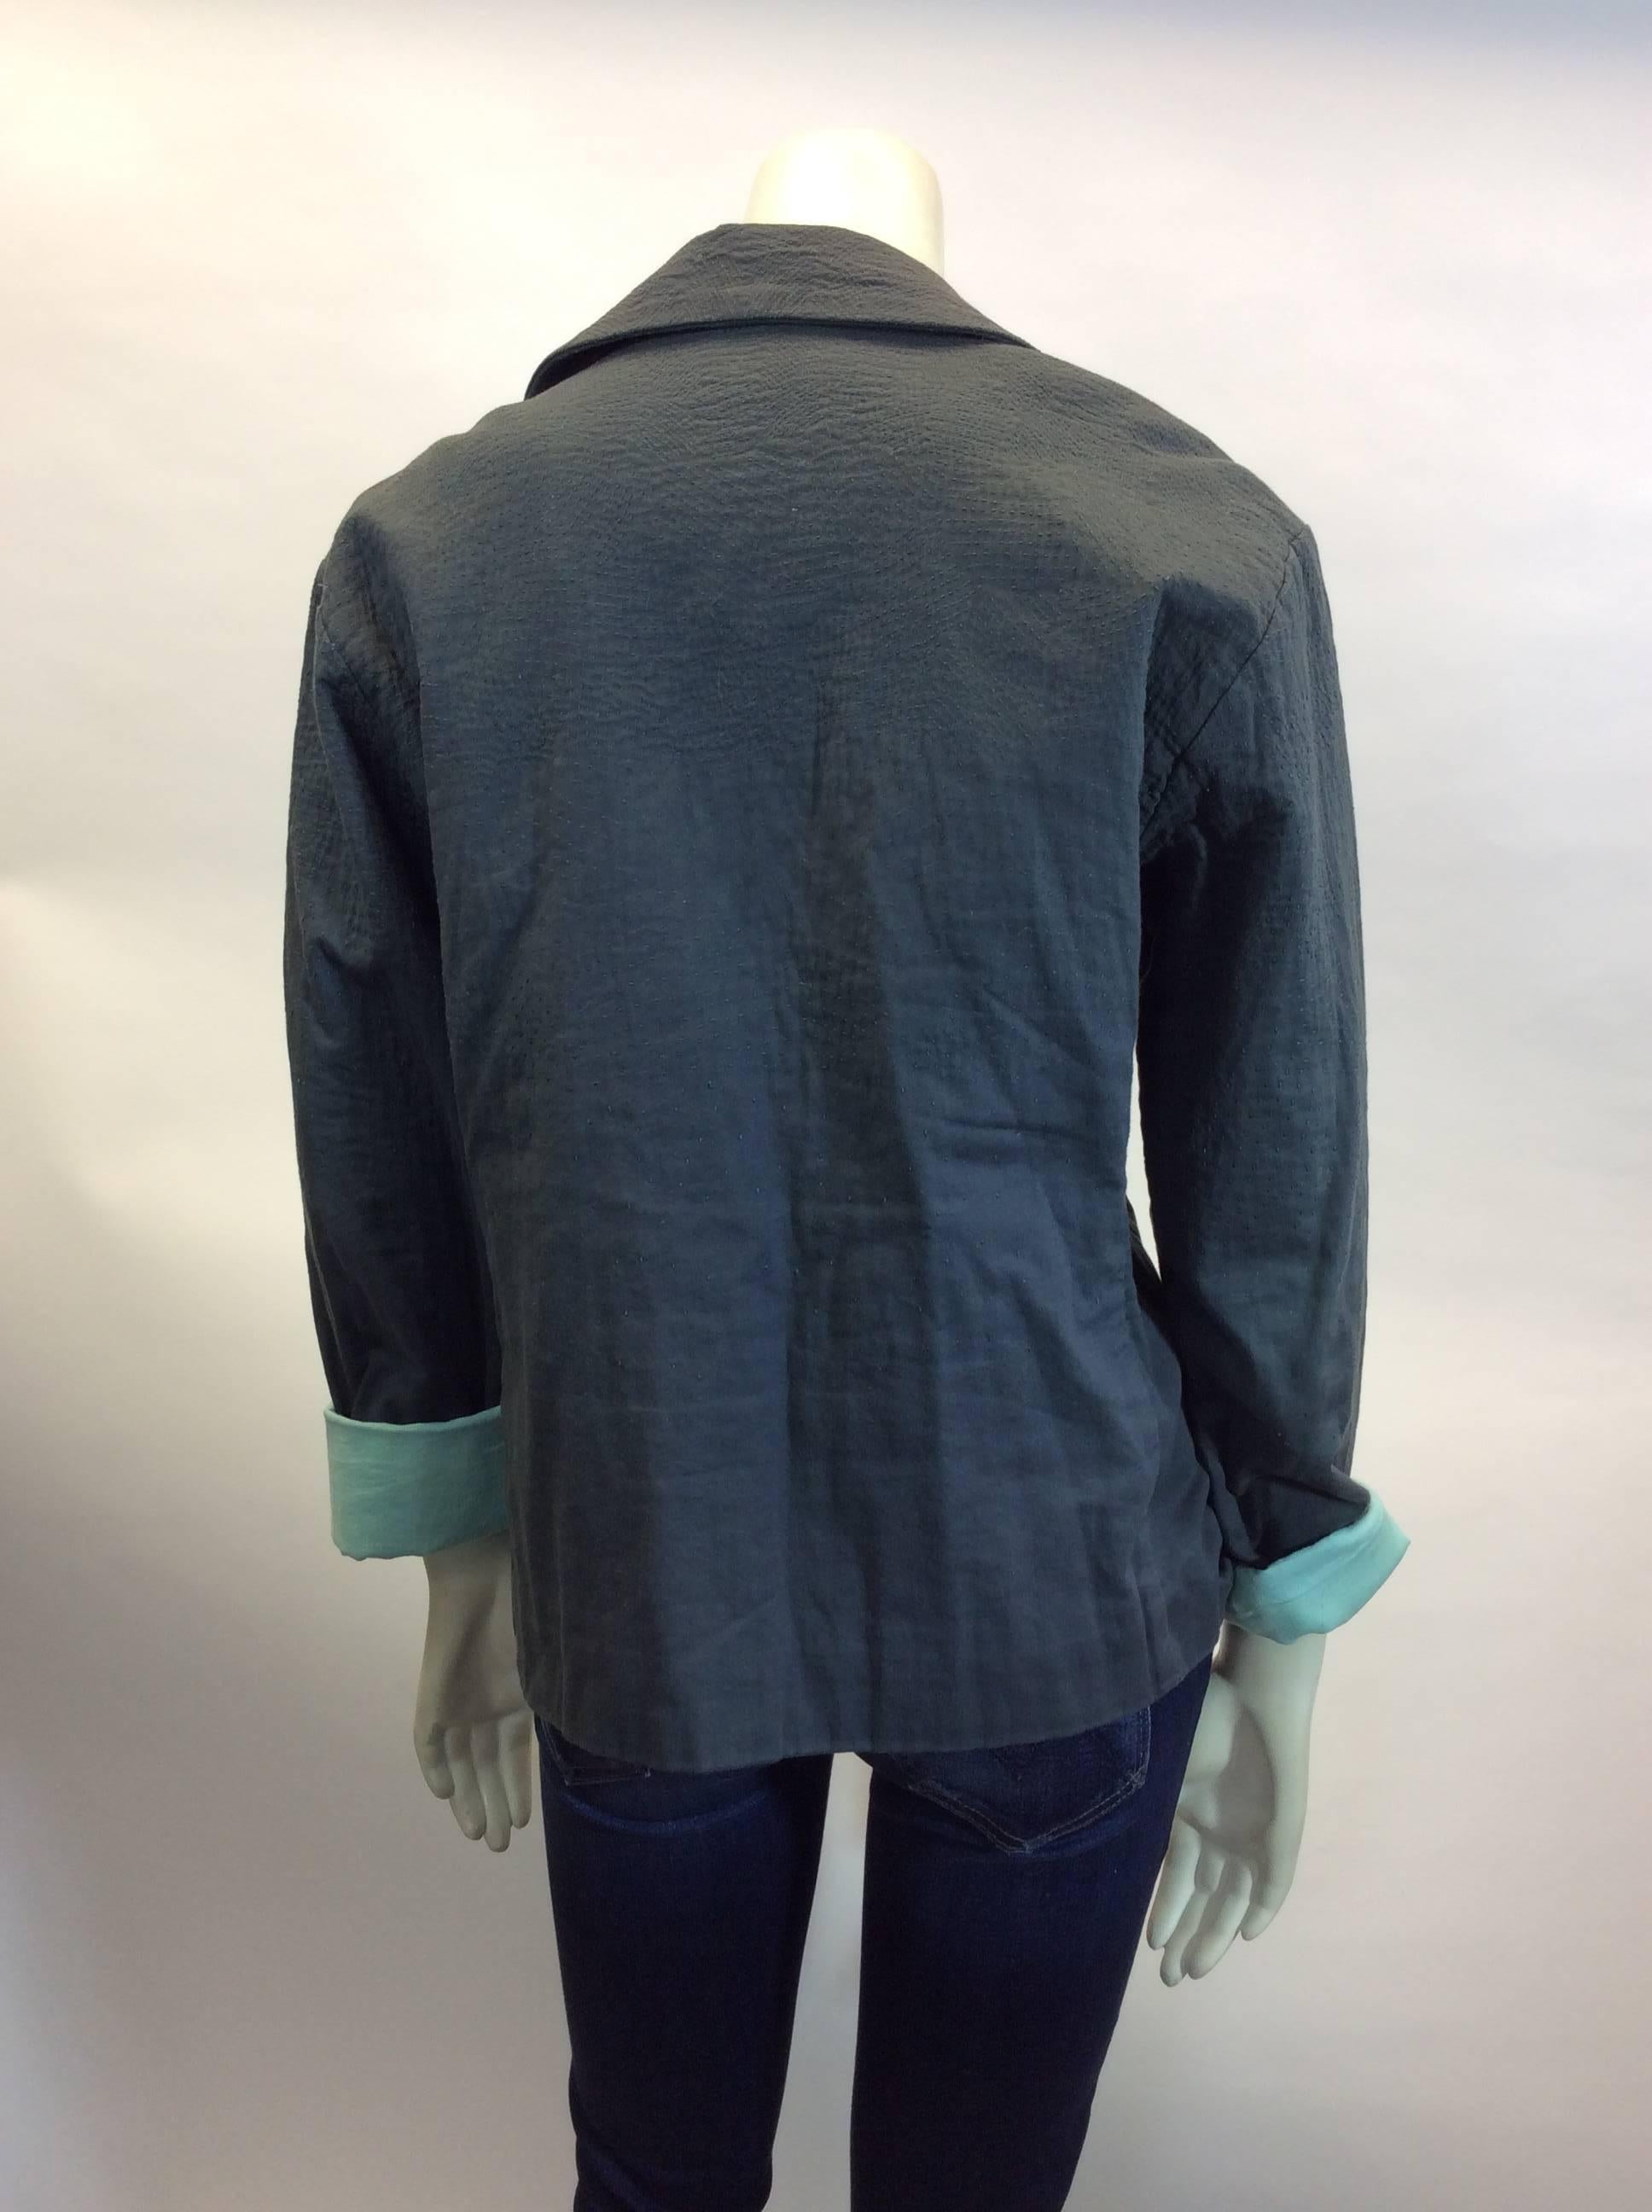 Issey Miyake Grey & Mint Jacket In Excellent Condition For Sale In Narberth, PA